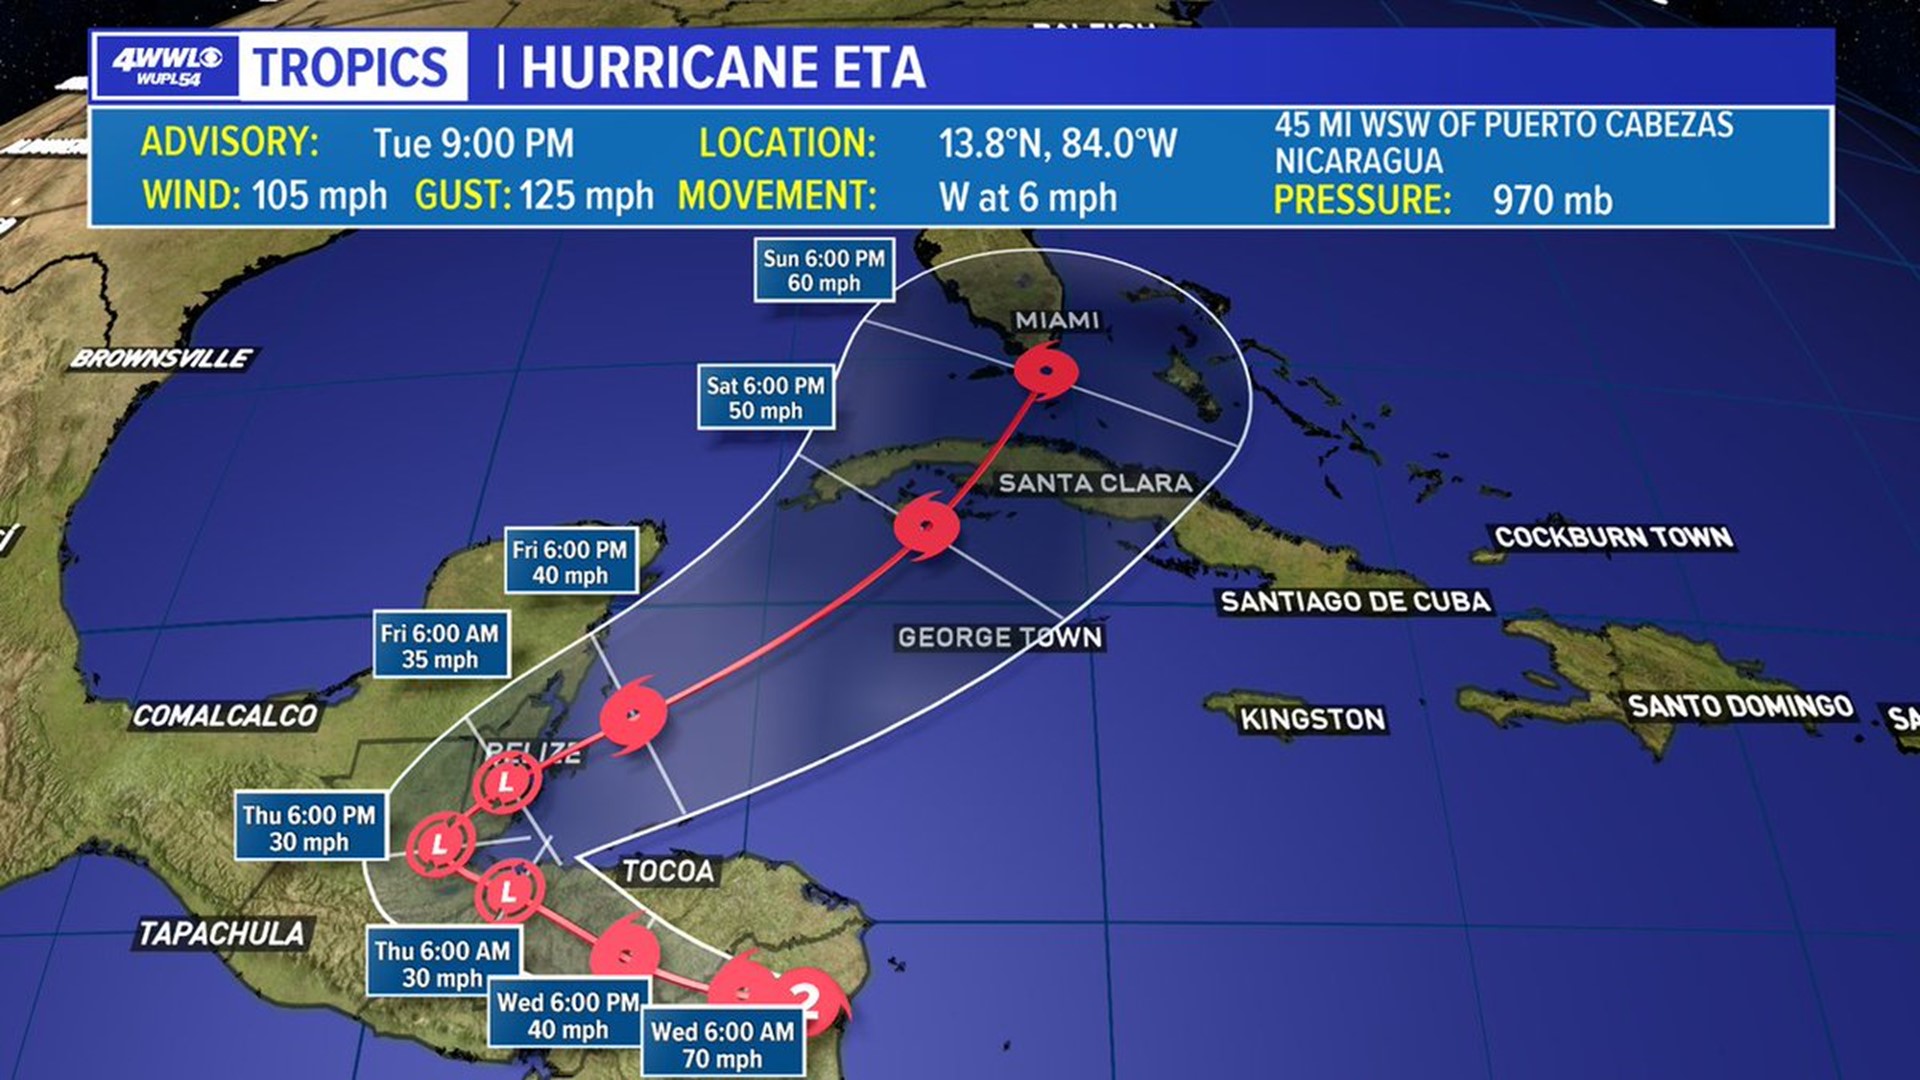 Hurricane Eta is a Category 2 storm that is making its way to the Caribbean but is expected to weaken.